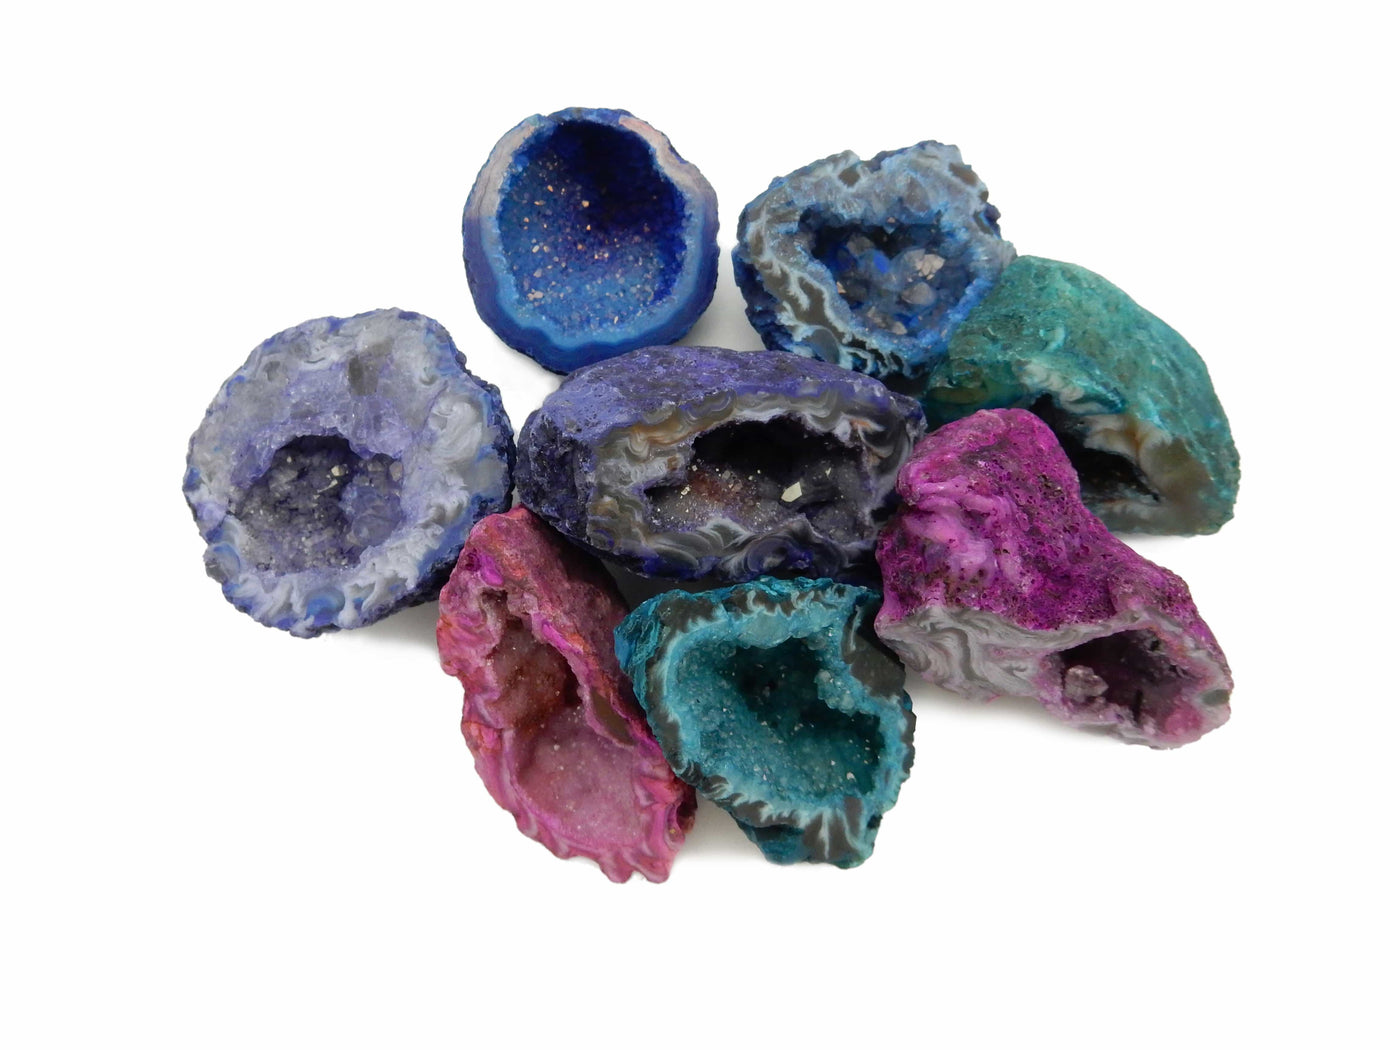 8 dyed geode halves in blue, teal, pink, and purple on white background